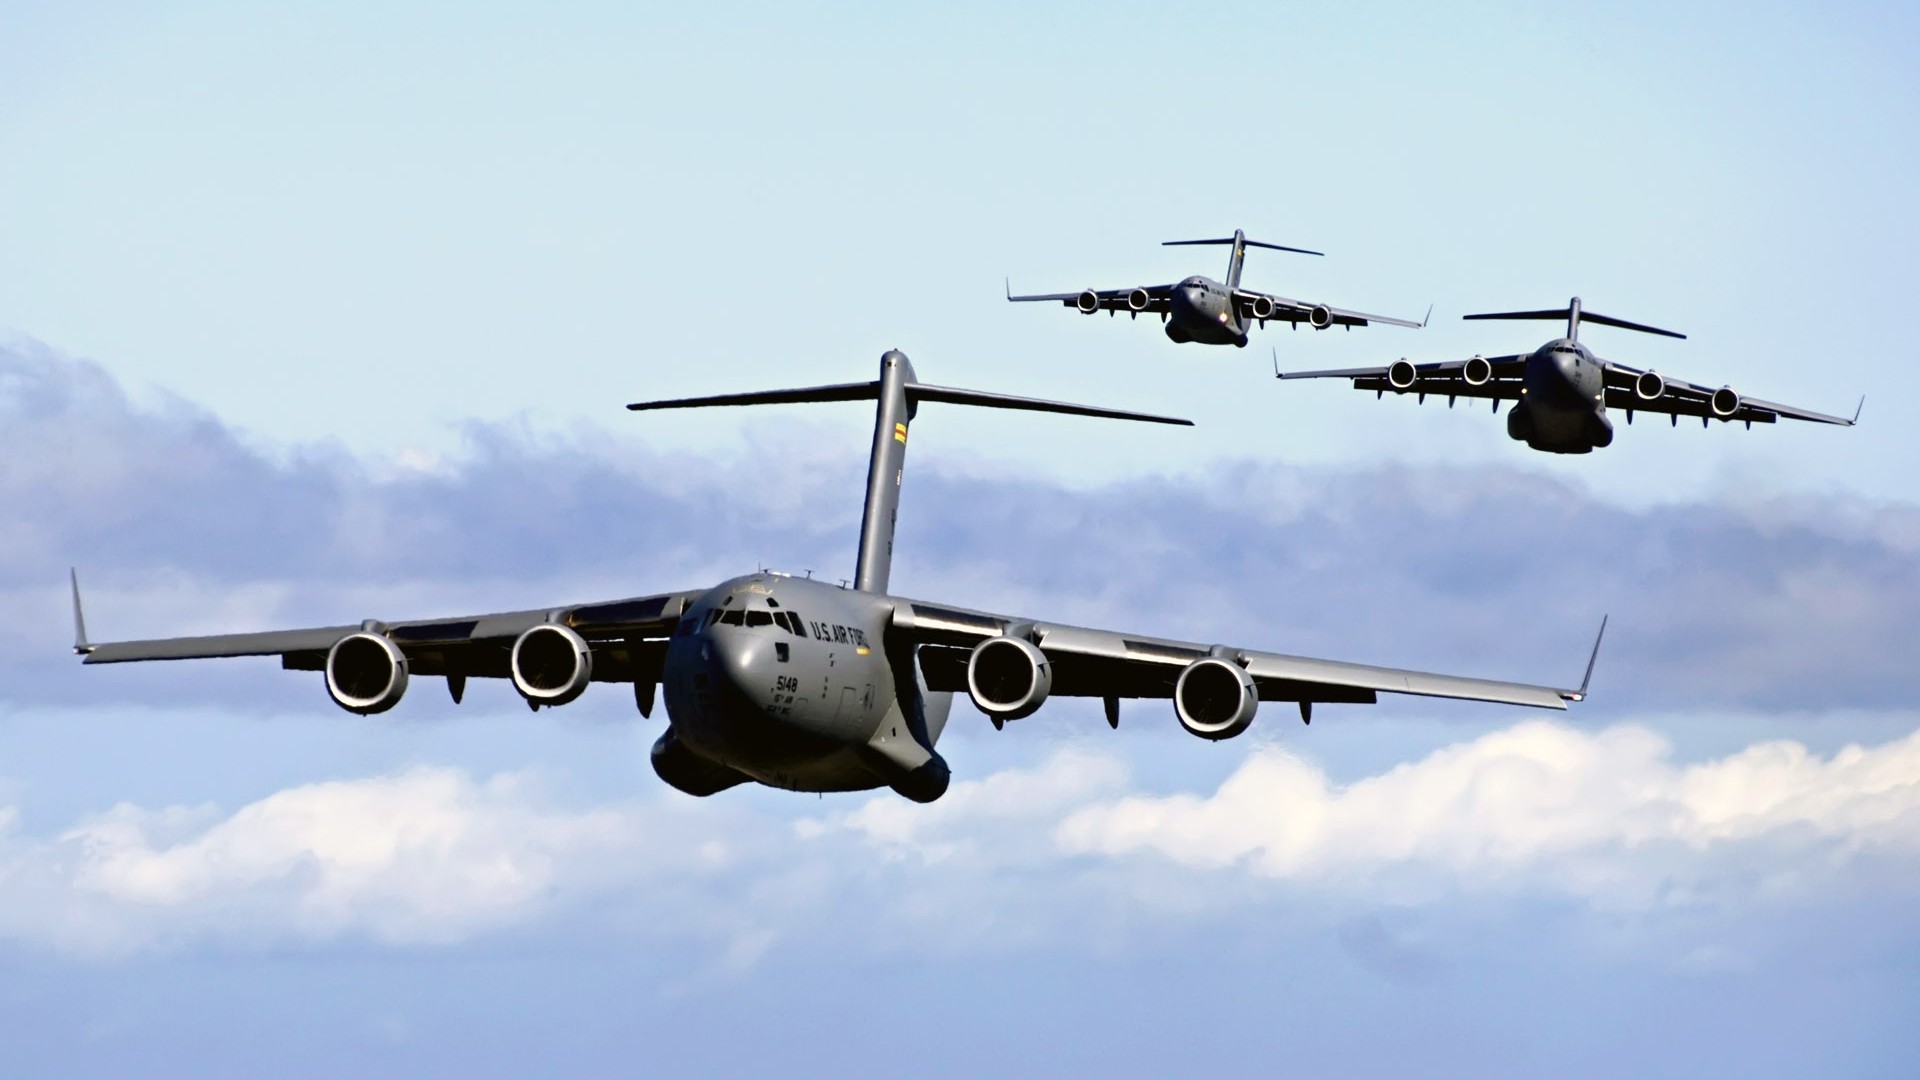 General 1920x1080 military aircraft airplane sky military aircraft military vehicle vehicle Boeing C-17 Globemaster III